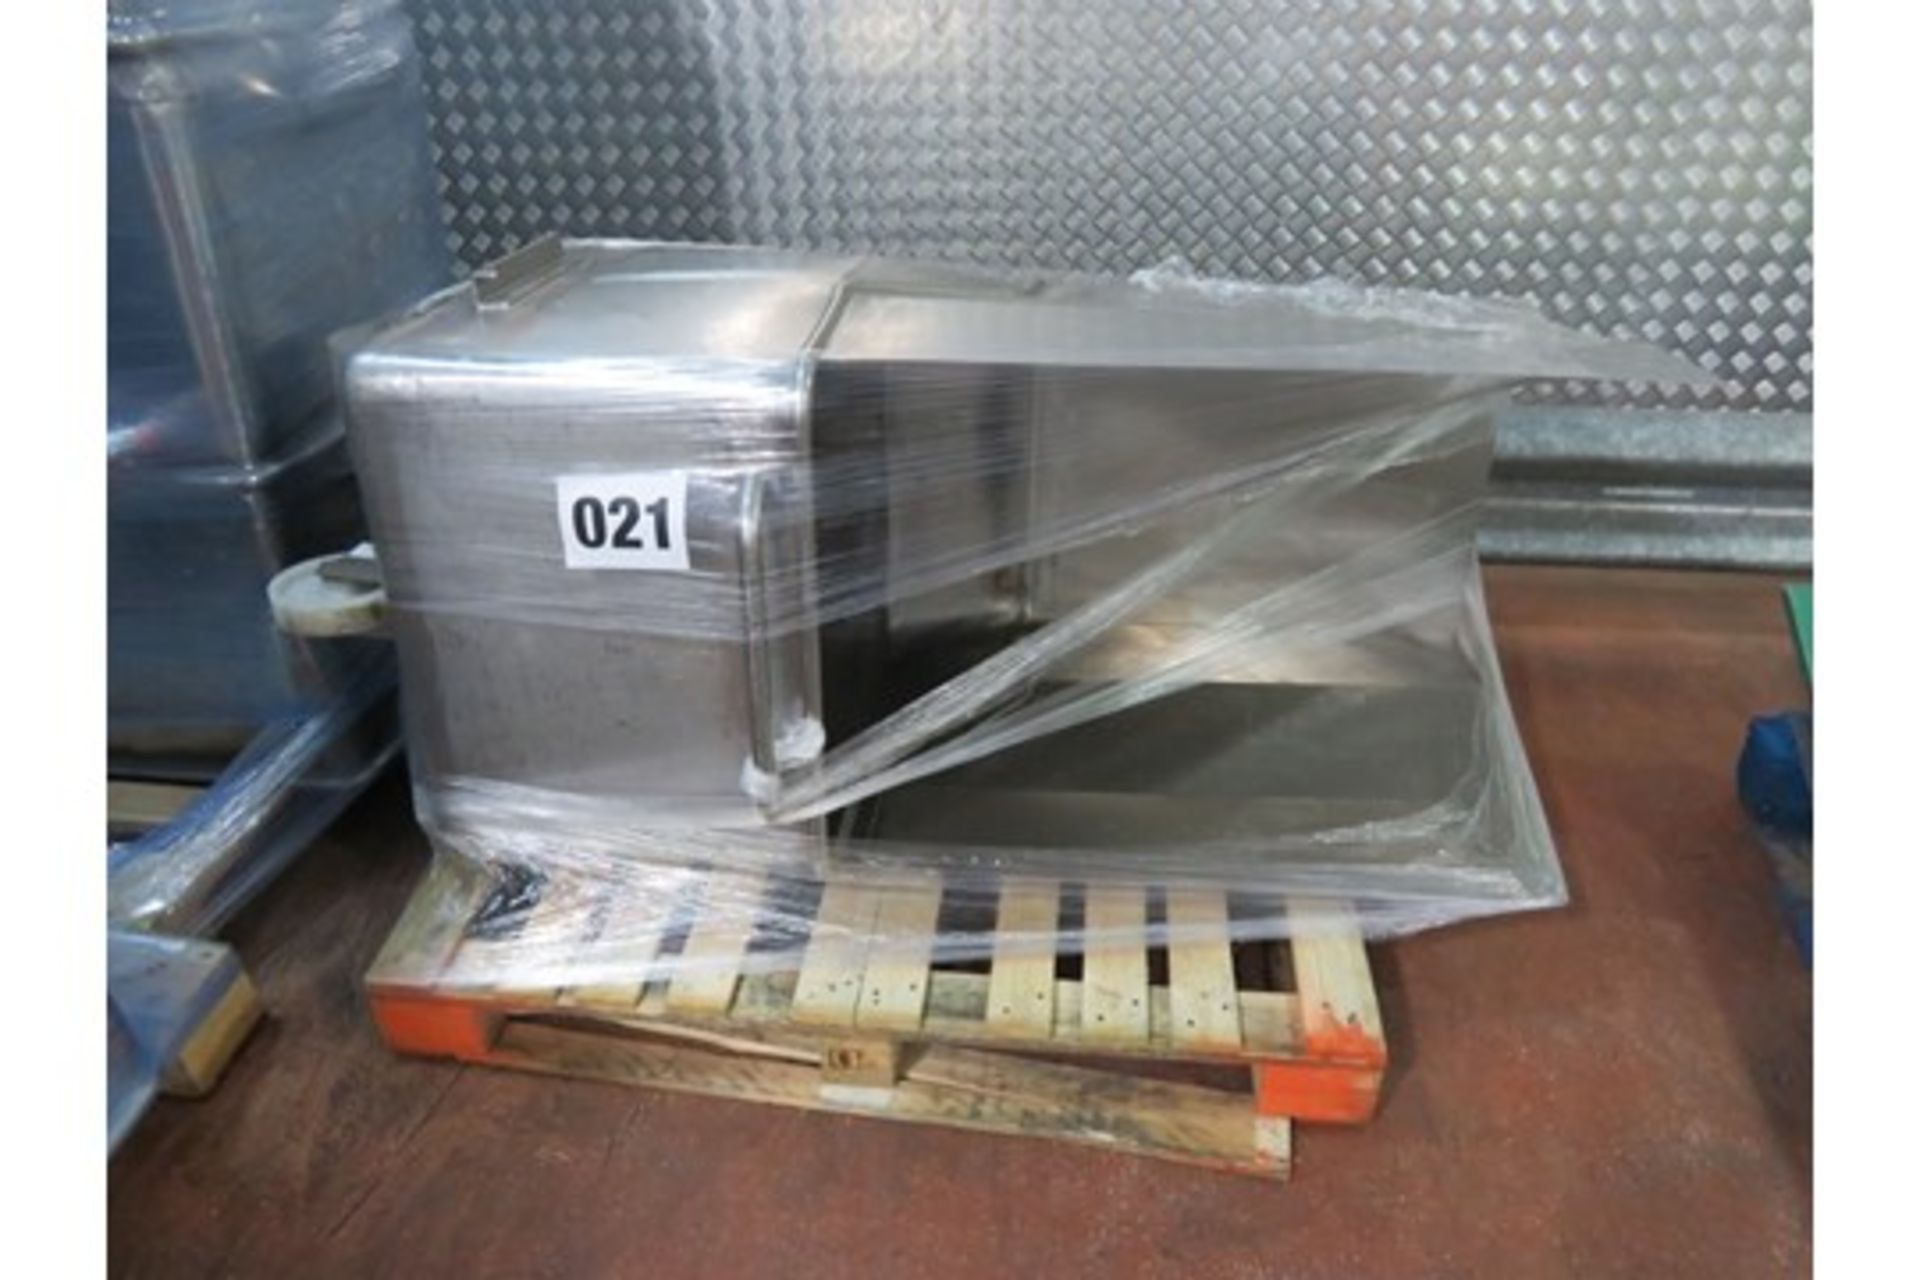 1 x 200 litre S/s Tote Bin with Lip. Approx. 1400mm high - Image 2 of 2